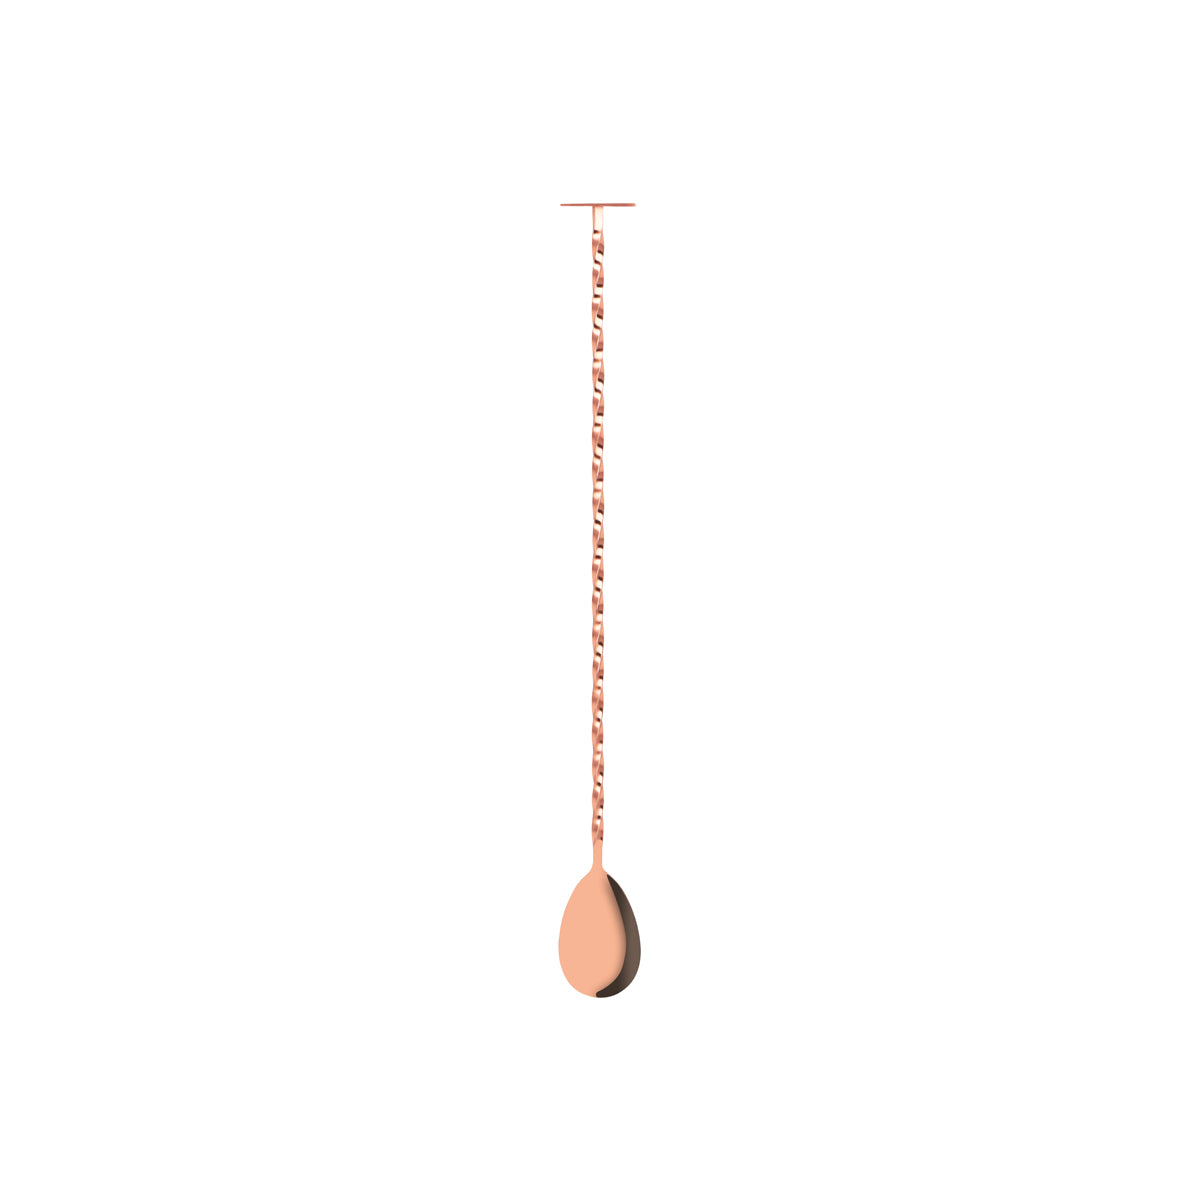 Tail Disk Bar Spoon - W/Muddler, Rose Gold from Zanzi. Packed in a gift box and sold in boxes of 1. Hospitality quality at wholesale price with The Flying Fork! 